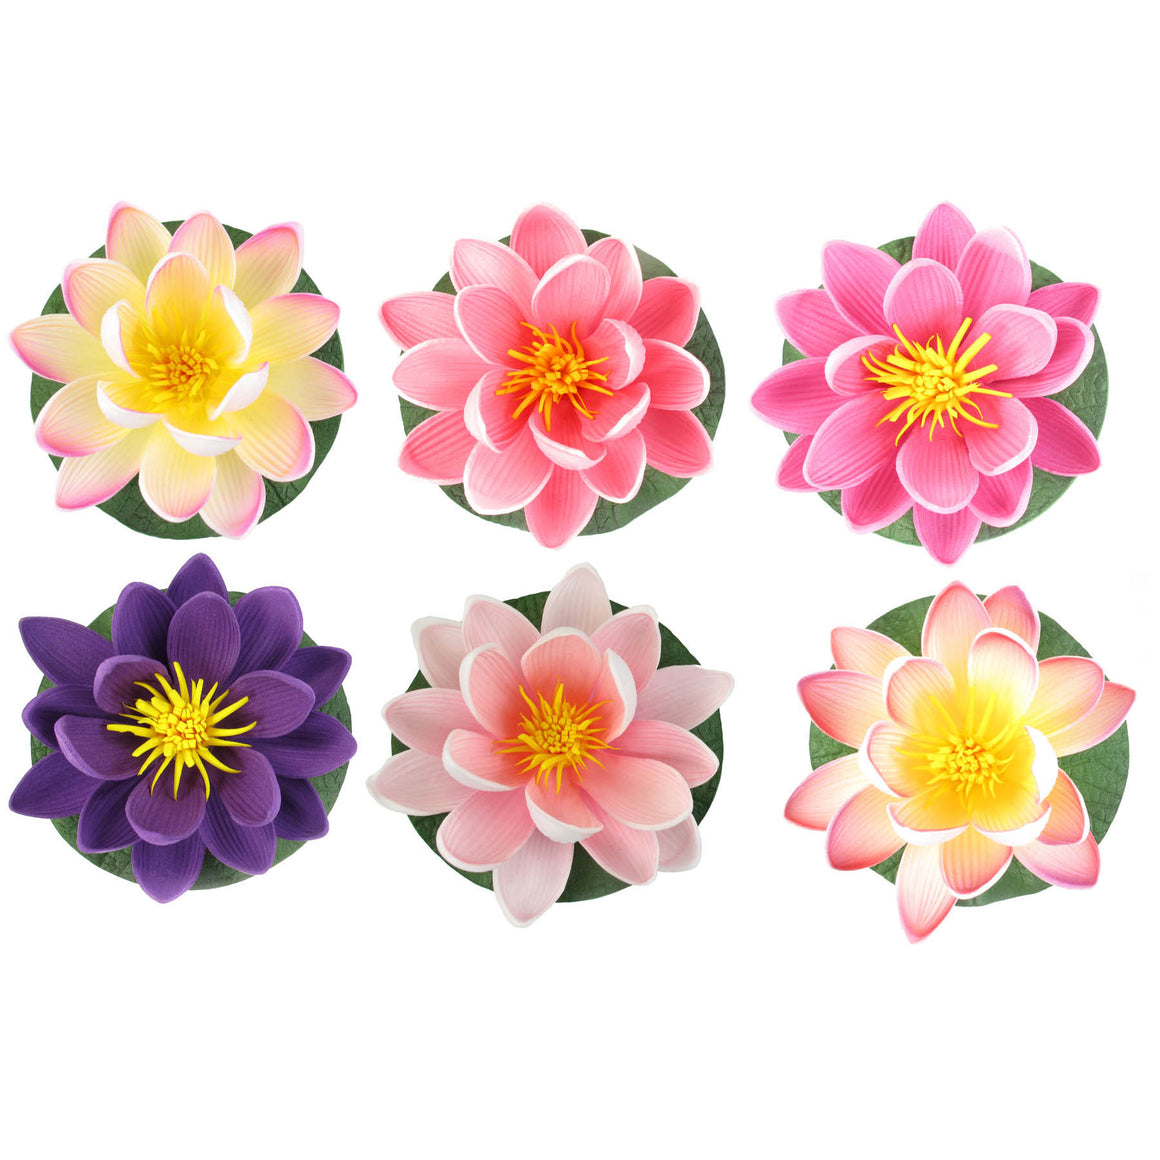 Small Floating Foam Water Lily Flowers, Assorted Cool Colors, A Set of 6, For Small Water Feature, 3.25" x 3.25" x 2" (each) - TropicaZona